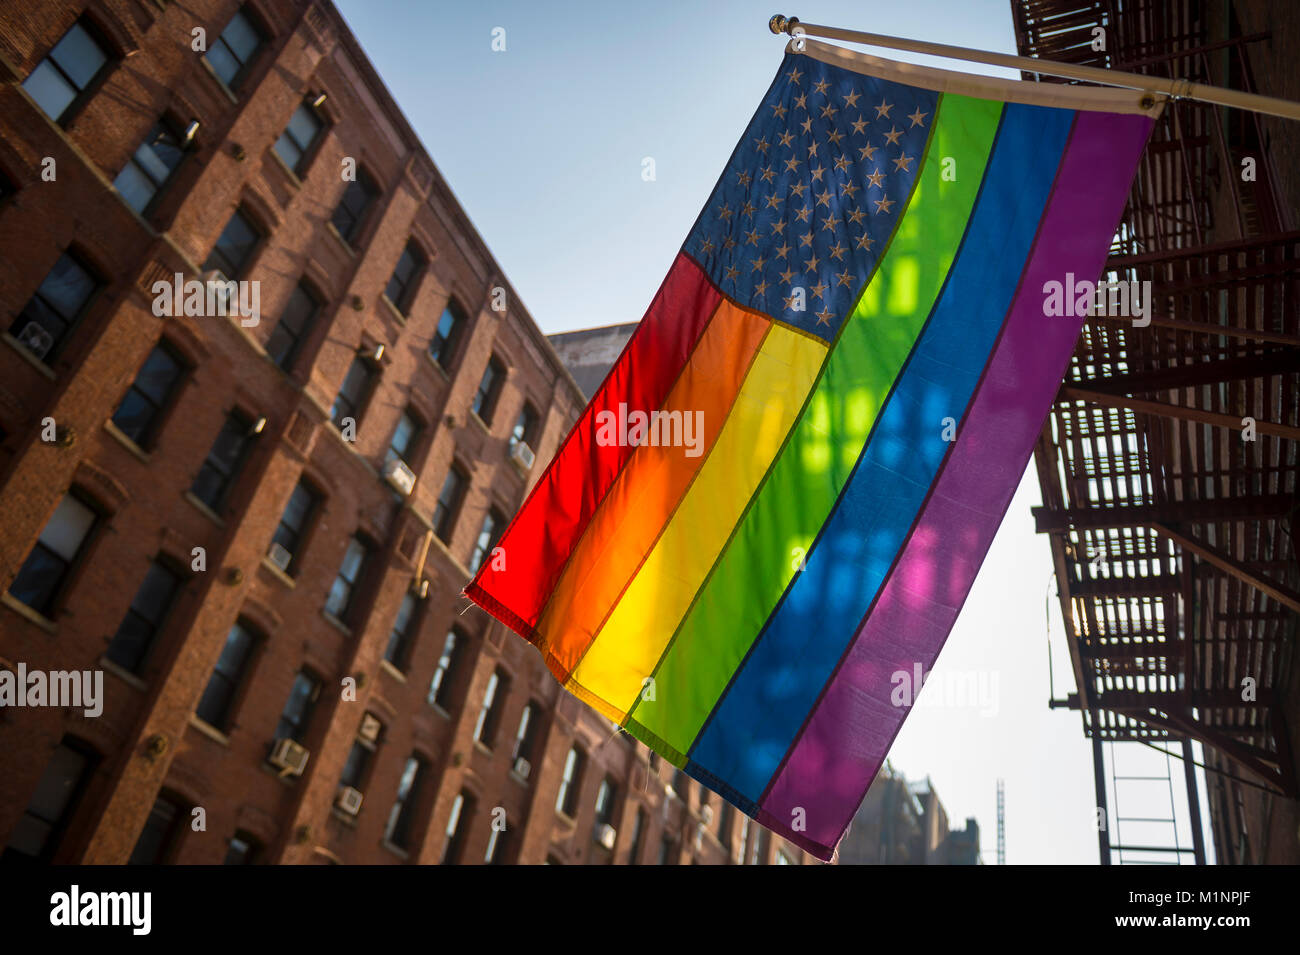 American flag with stars and gay pride rainbow stripes hanging from traditional Brooklyn building in the liberal city of New York Stock Photo